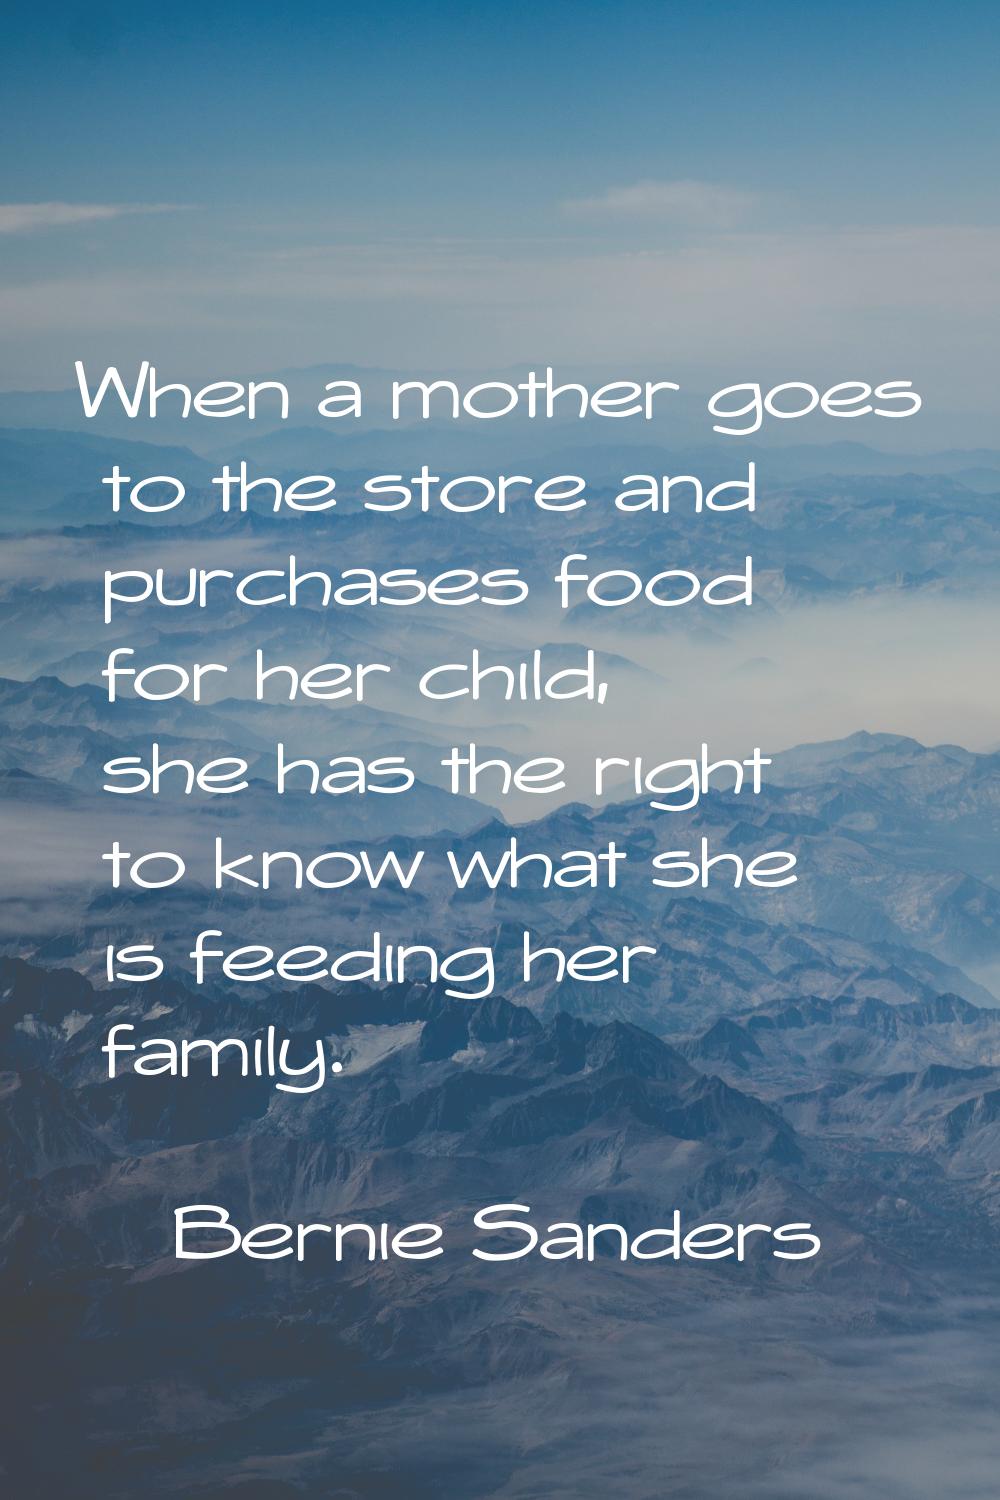 When a mother goes to the store and purchases food for her child, she has the right to know what sh